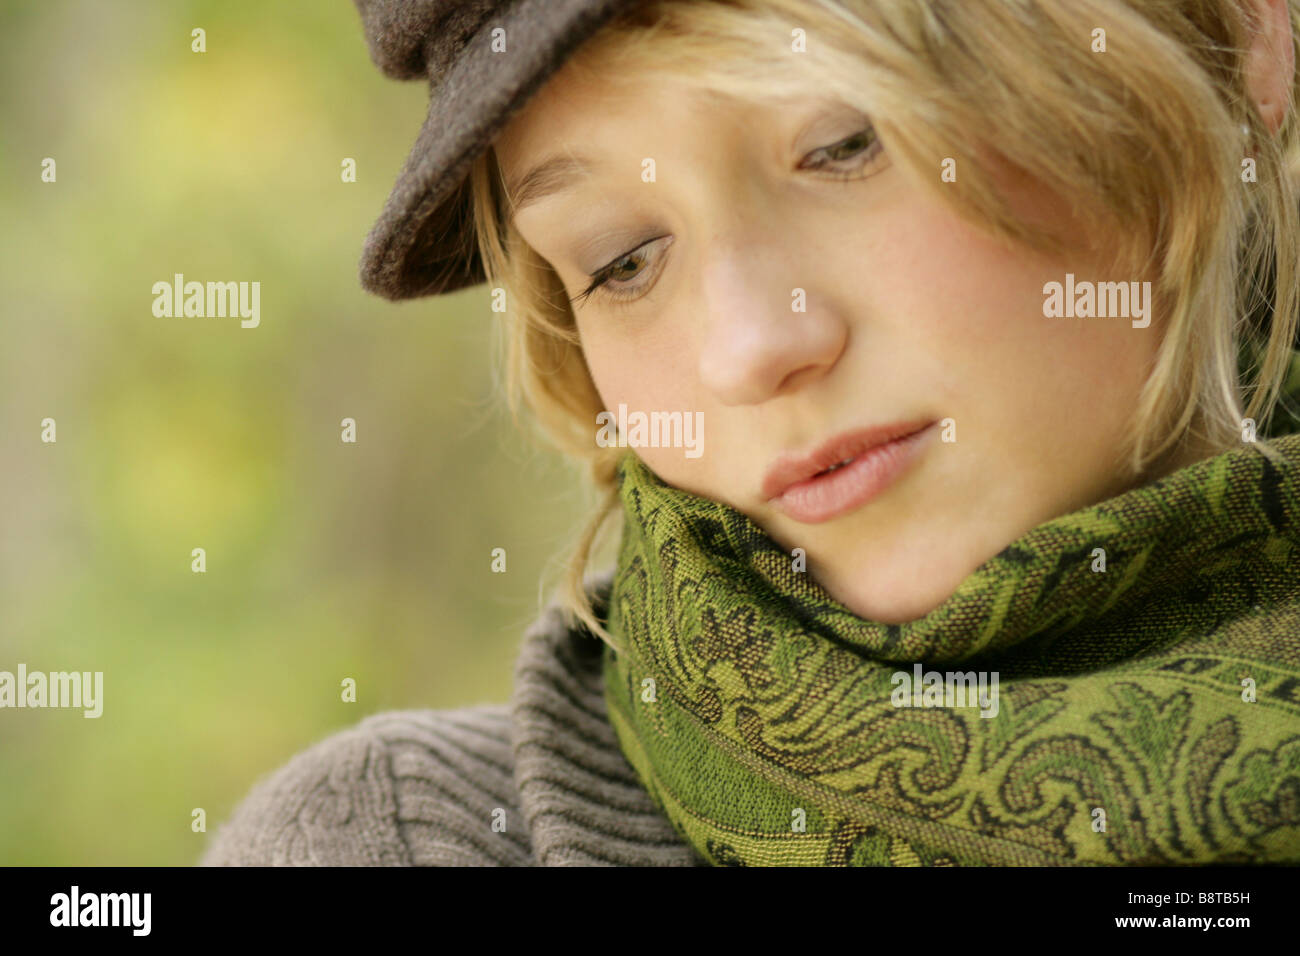 young blond dreamy girl with cap Stock Photo